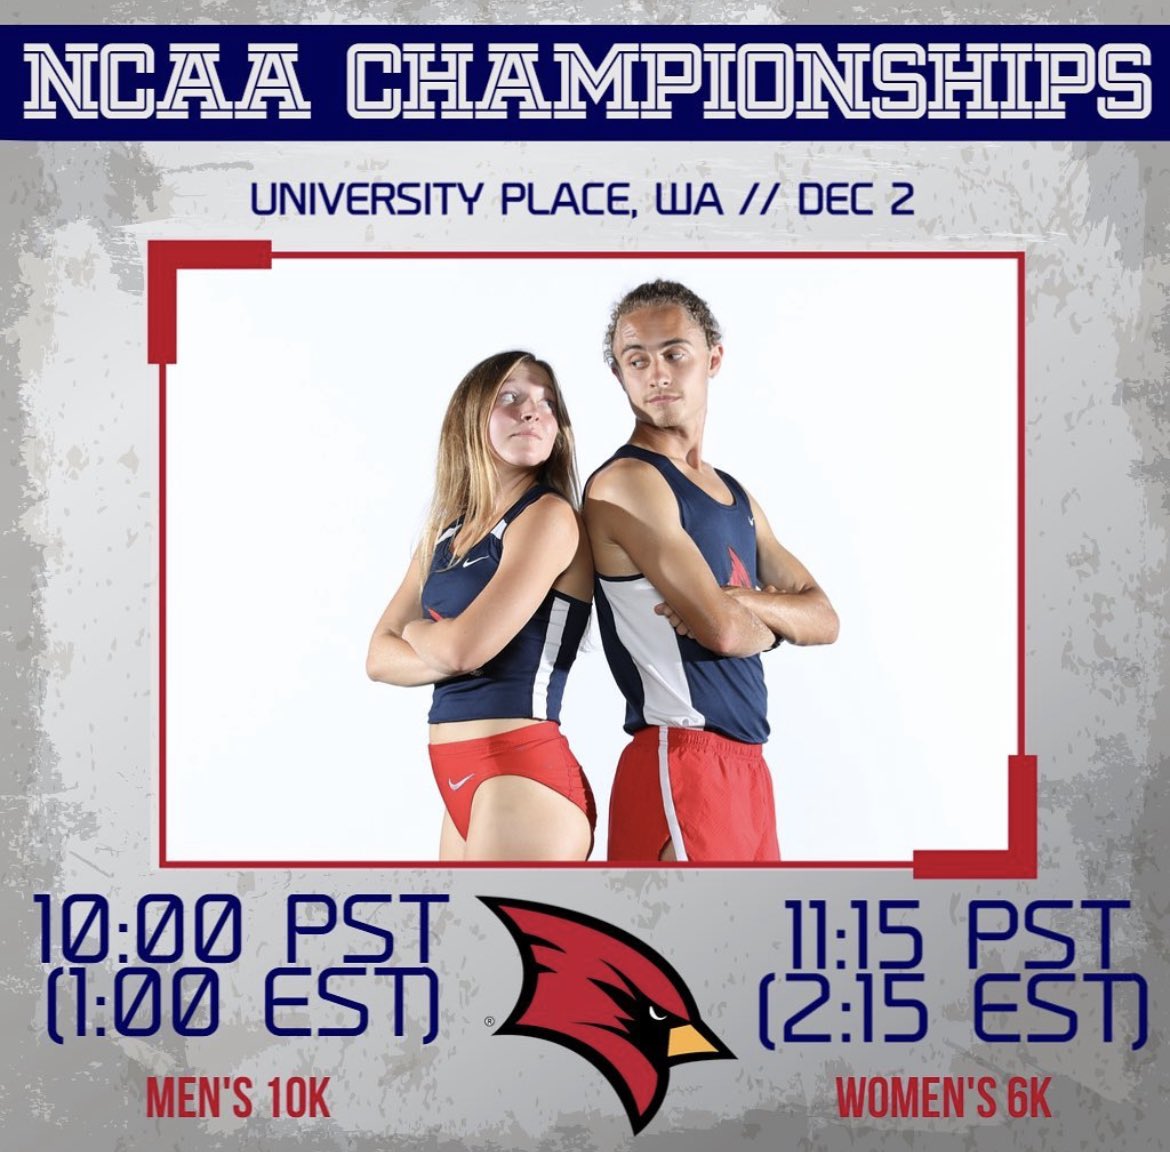 Finally race day! Tune in to watch our men’s and women’s cross country teams compete at nationals using this link: ncaa.com/video/cross-co…